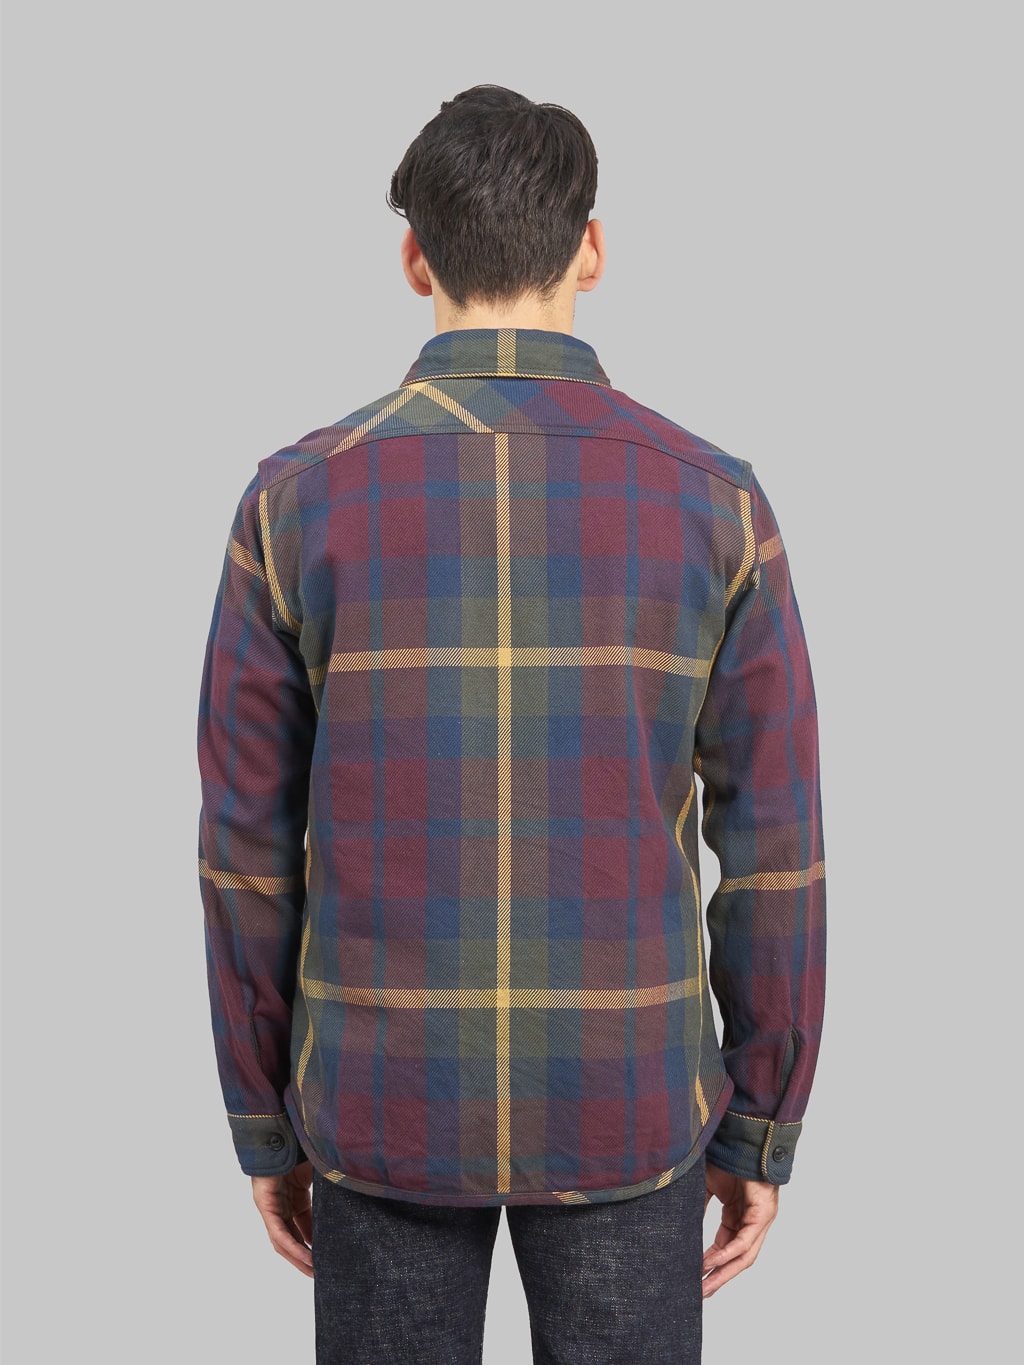 UES Extra Heavy Flannel Shirt wine model back fit